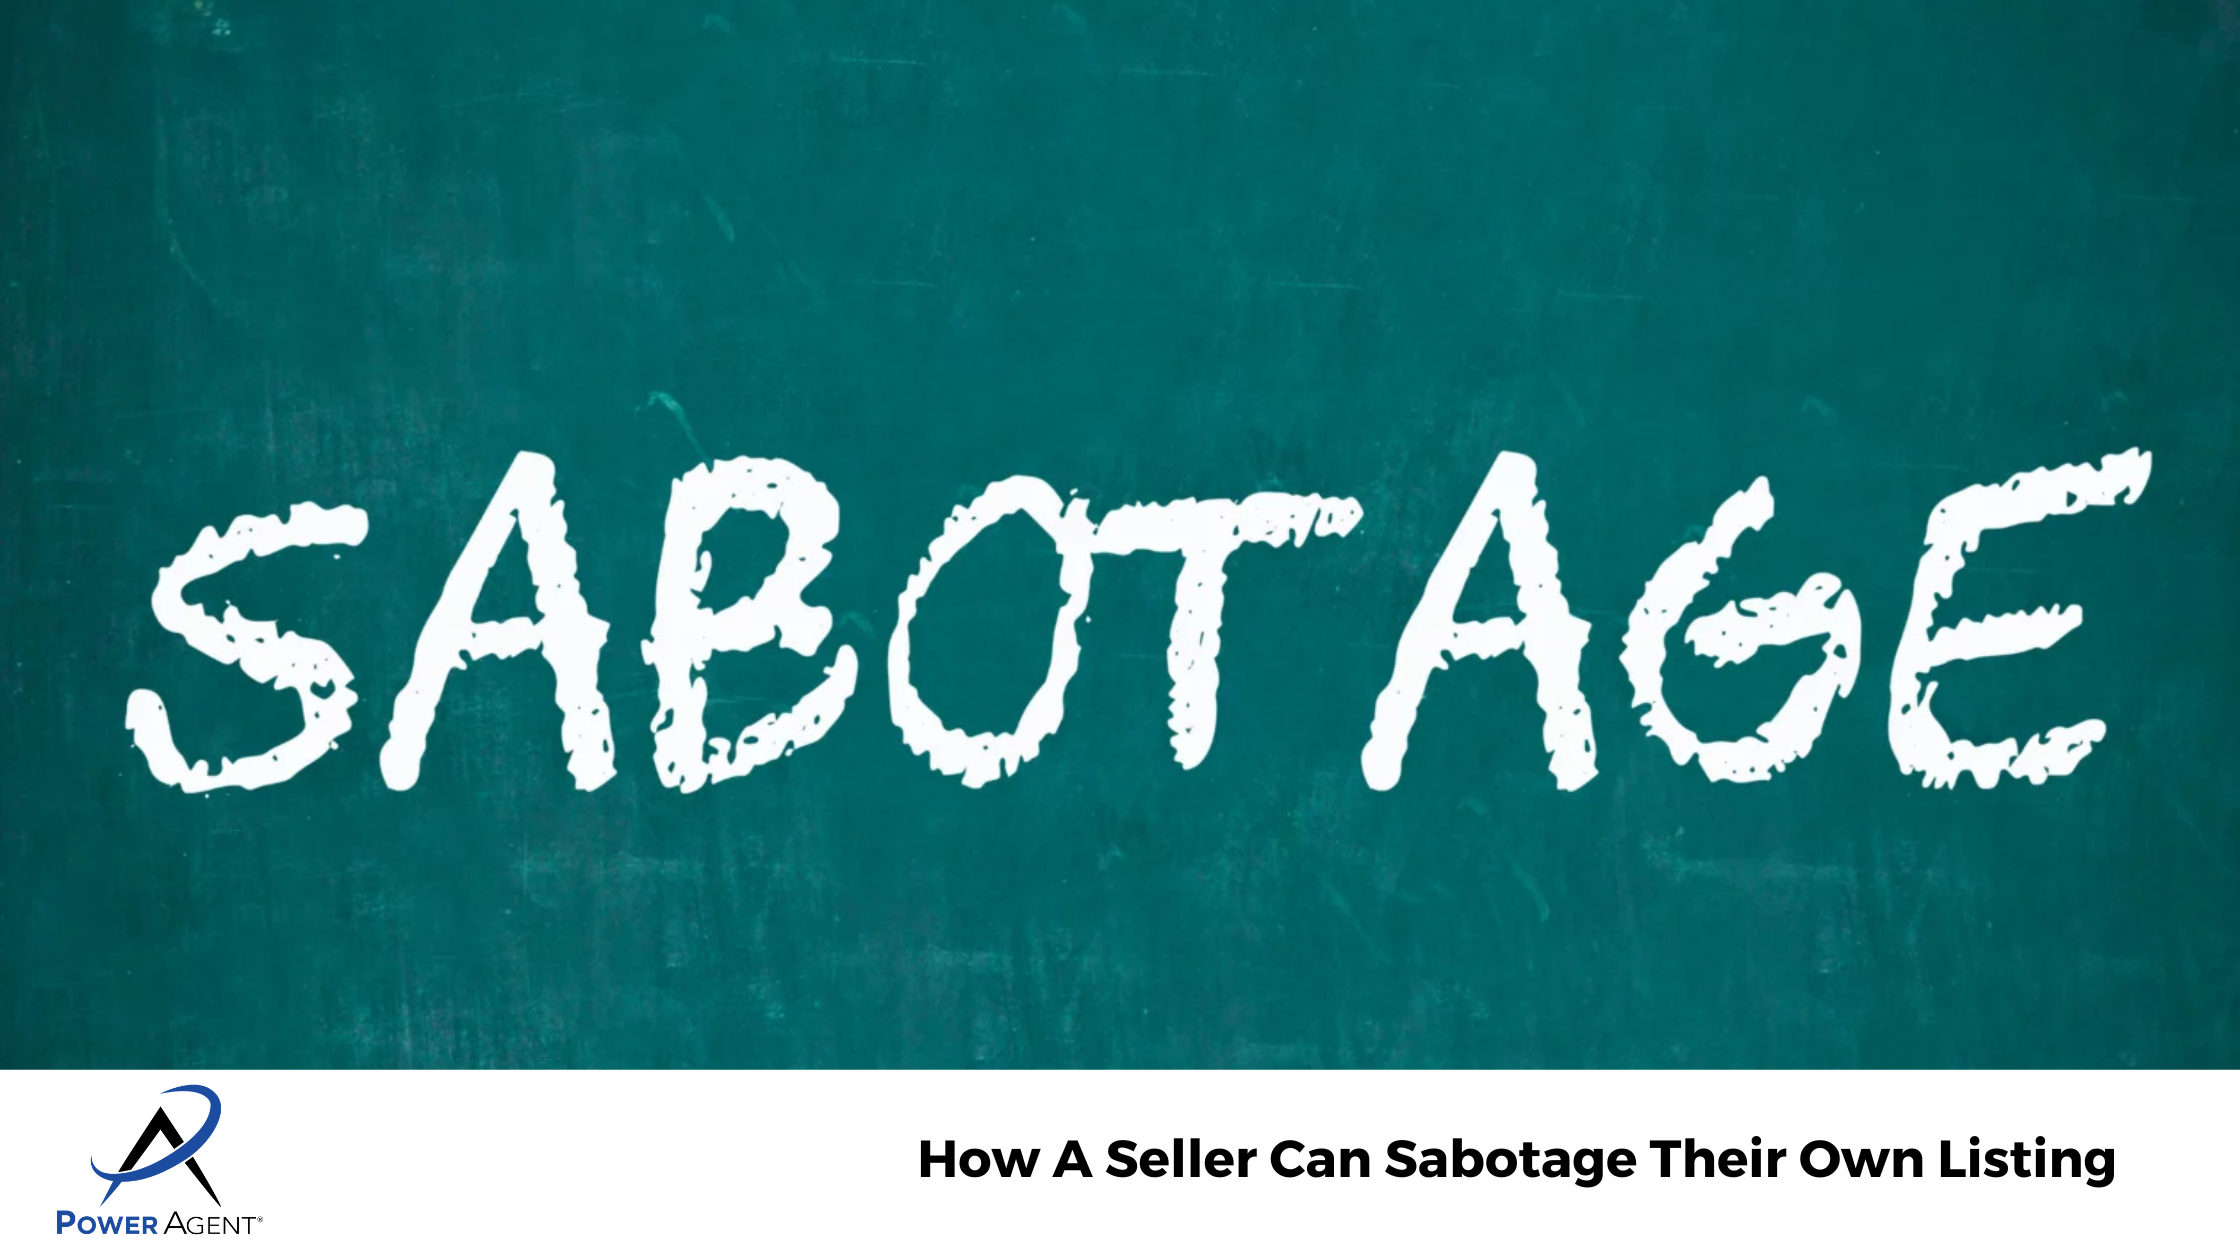 How A Seller Can Sabotage Their Own Listing